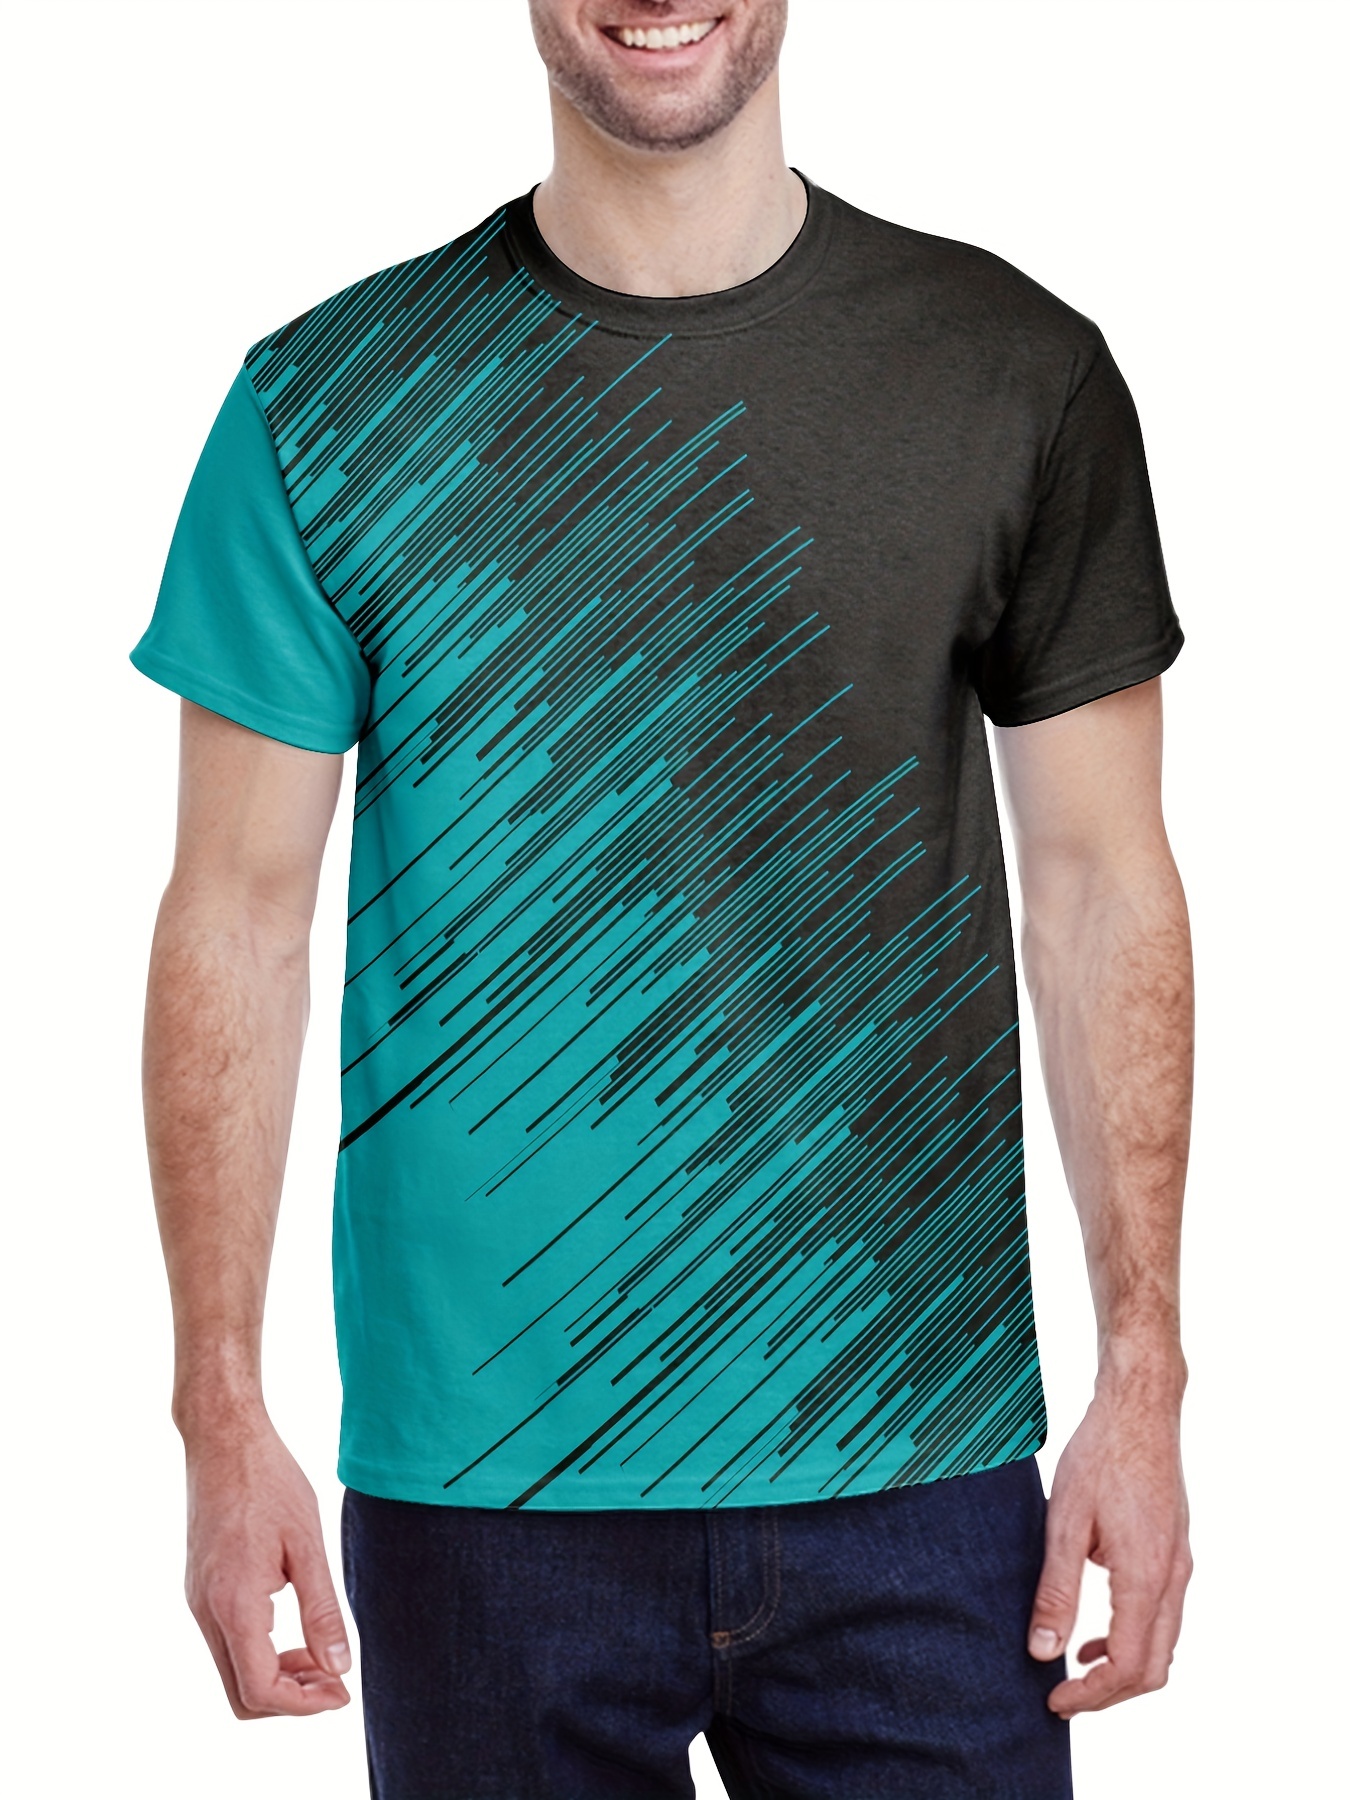 Plus Size Men's Casual Graphic Tees For Summer, Blue And Black